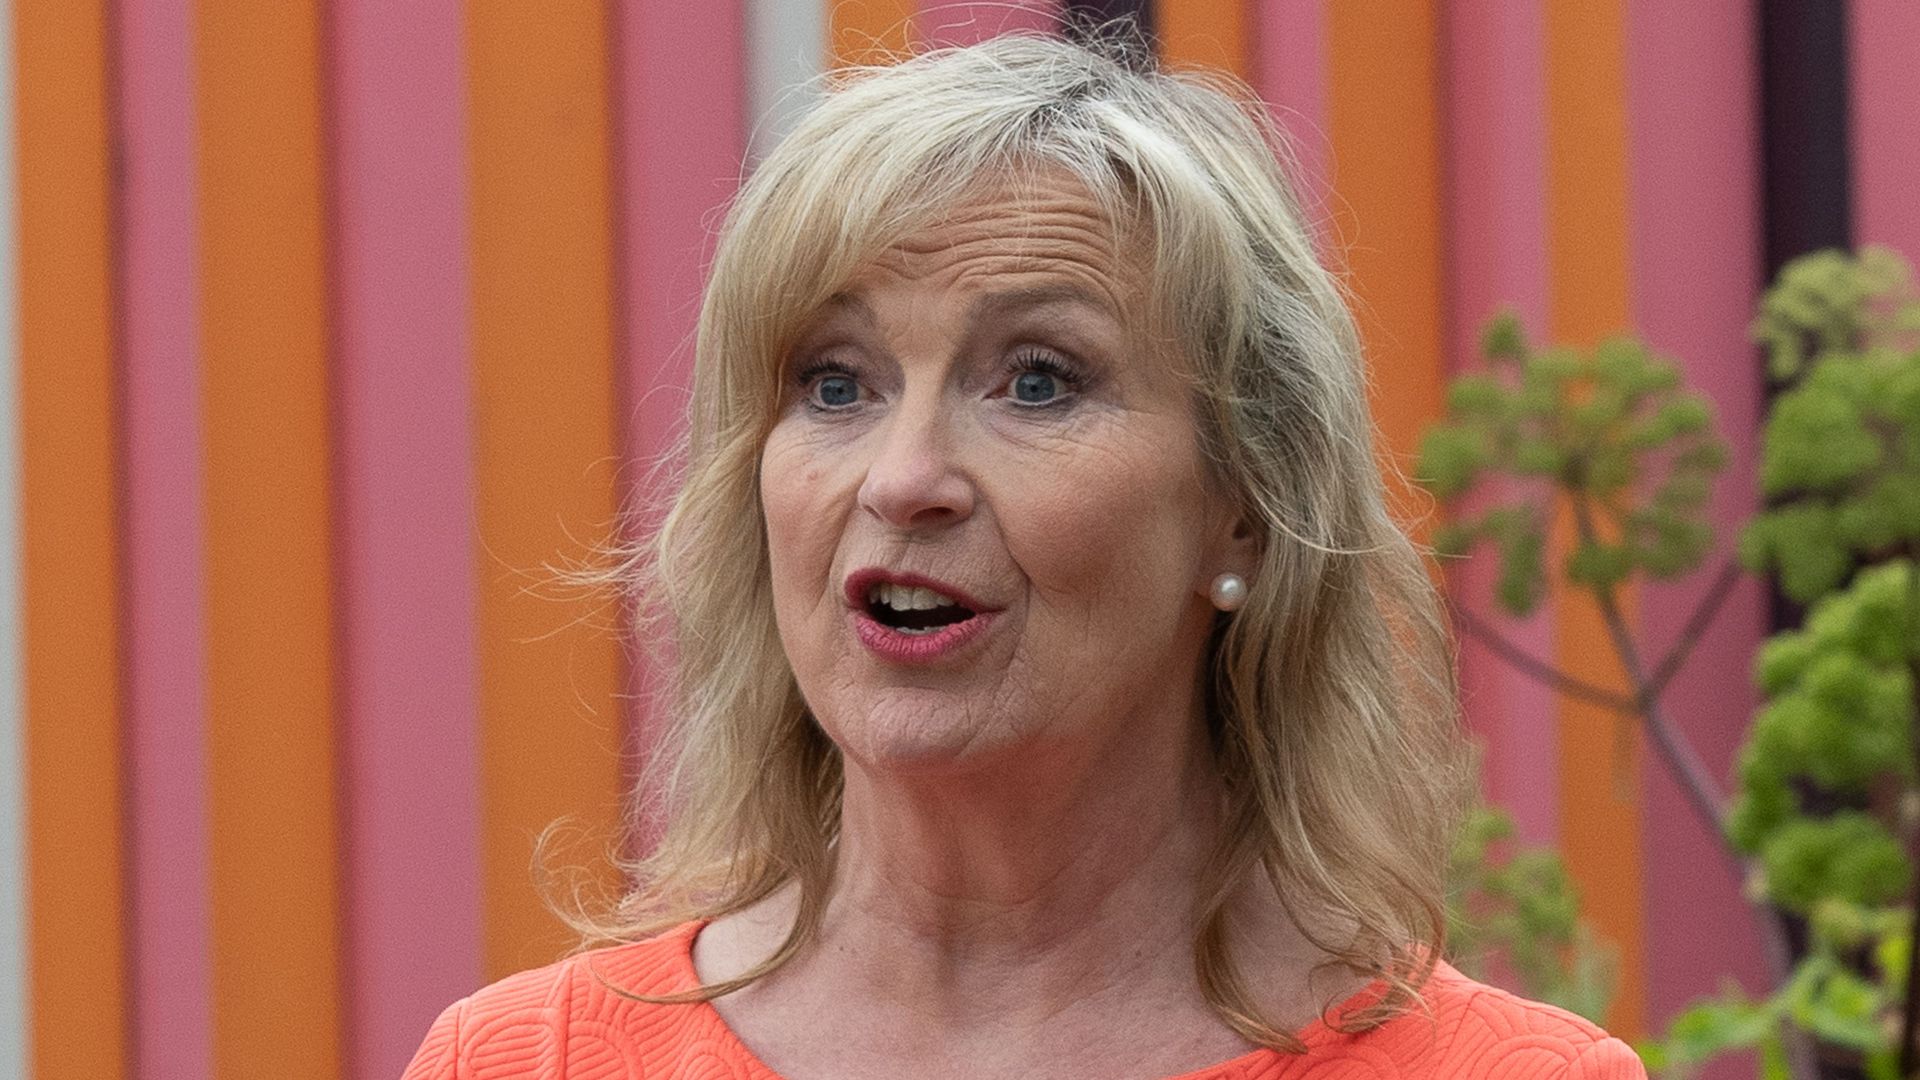 Carol Kirwood was broadcasting the BBC Weather live from Chelsea Flower Show 